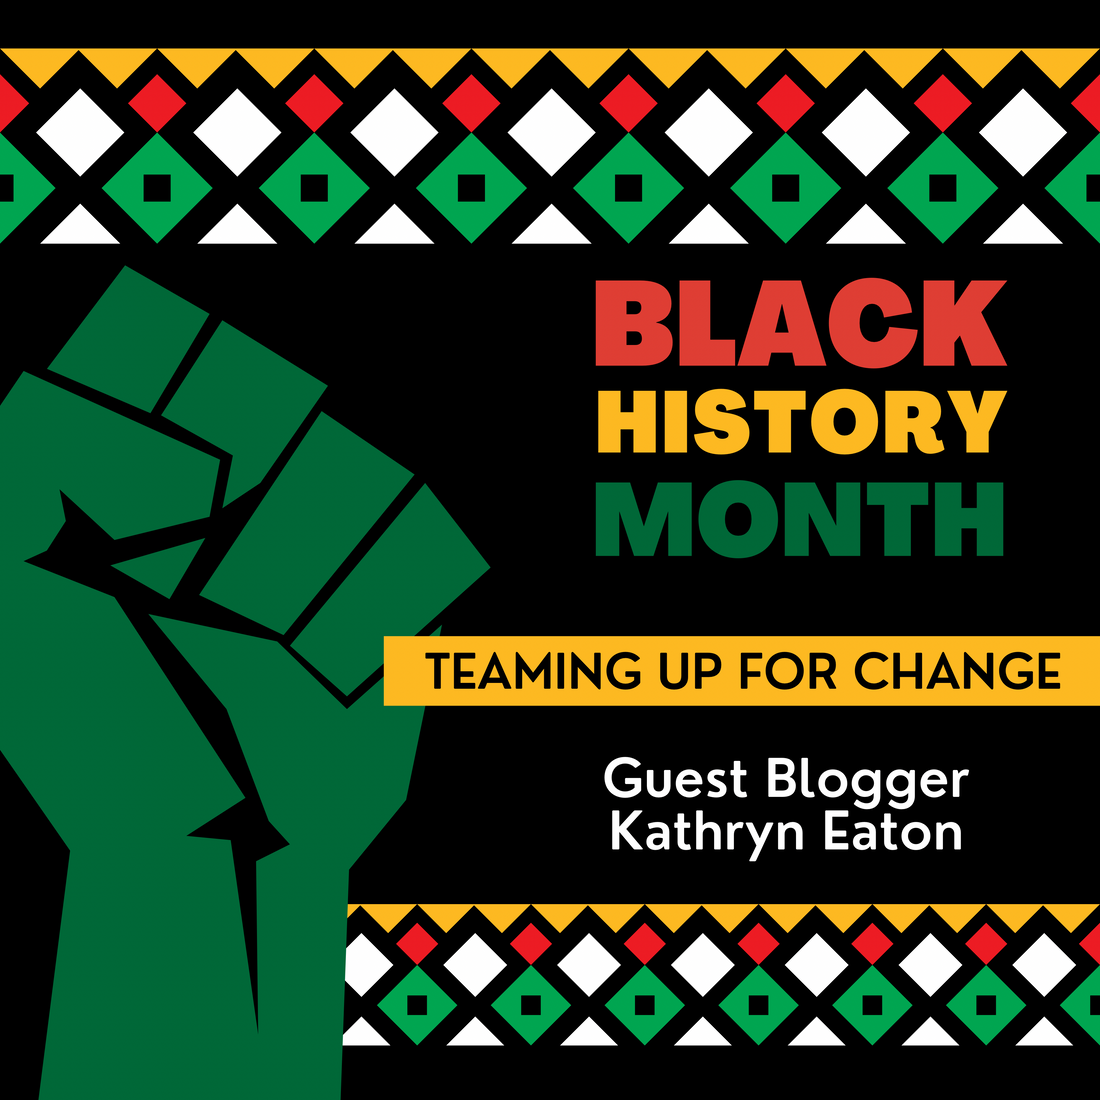 Black History Month - Teaming up for Change